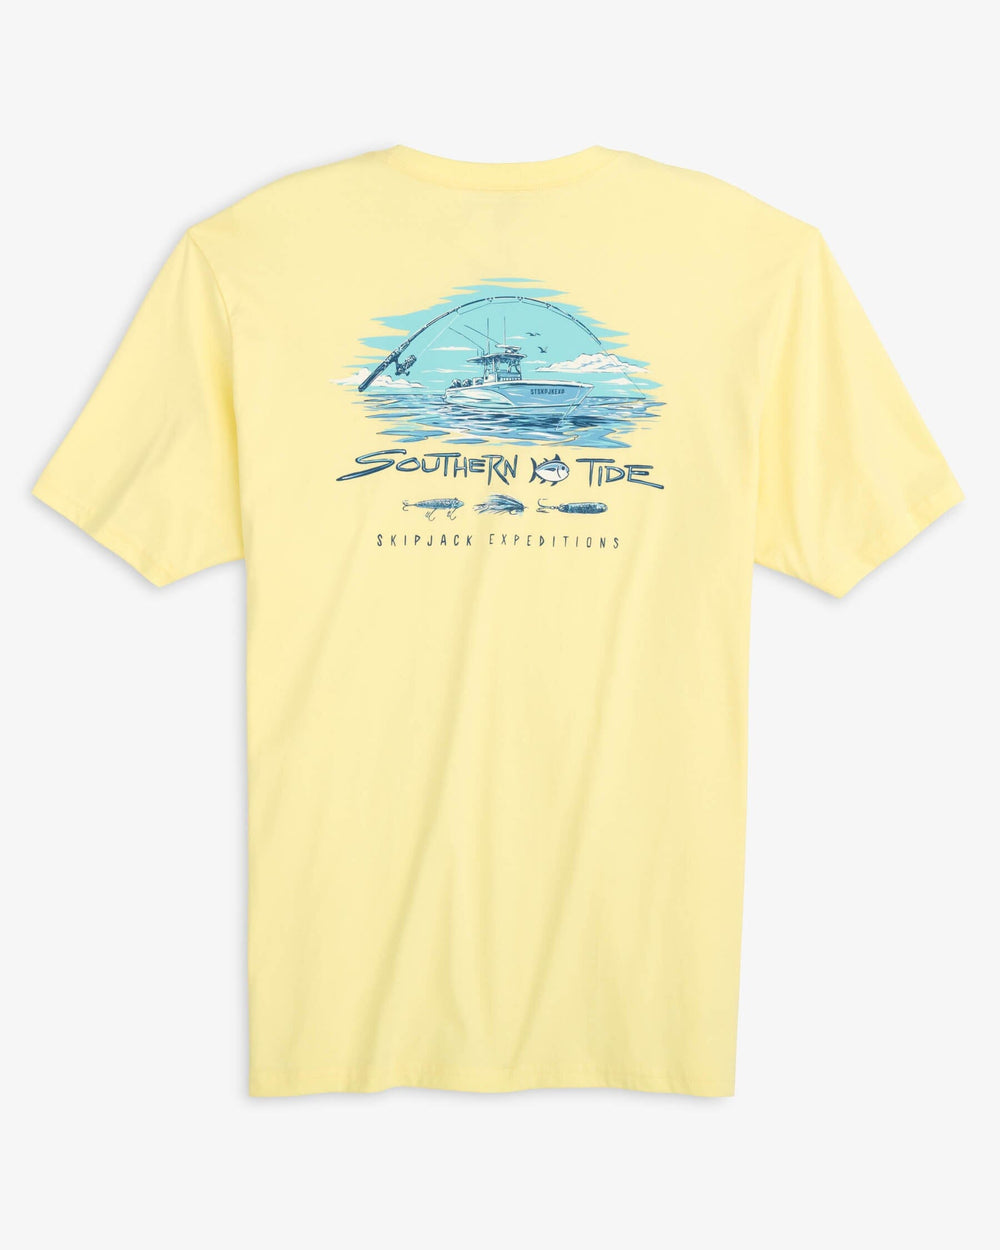 The back view of the Southern Tide Skipjack Expeditions T-Shirt by Southern Tide - Blonde